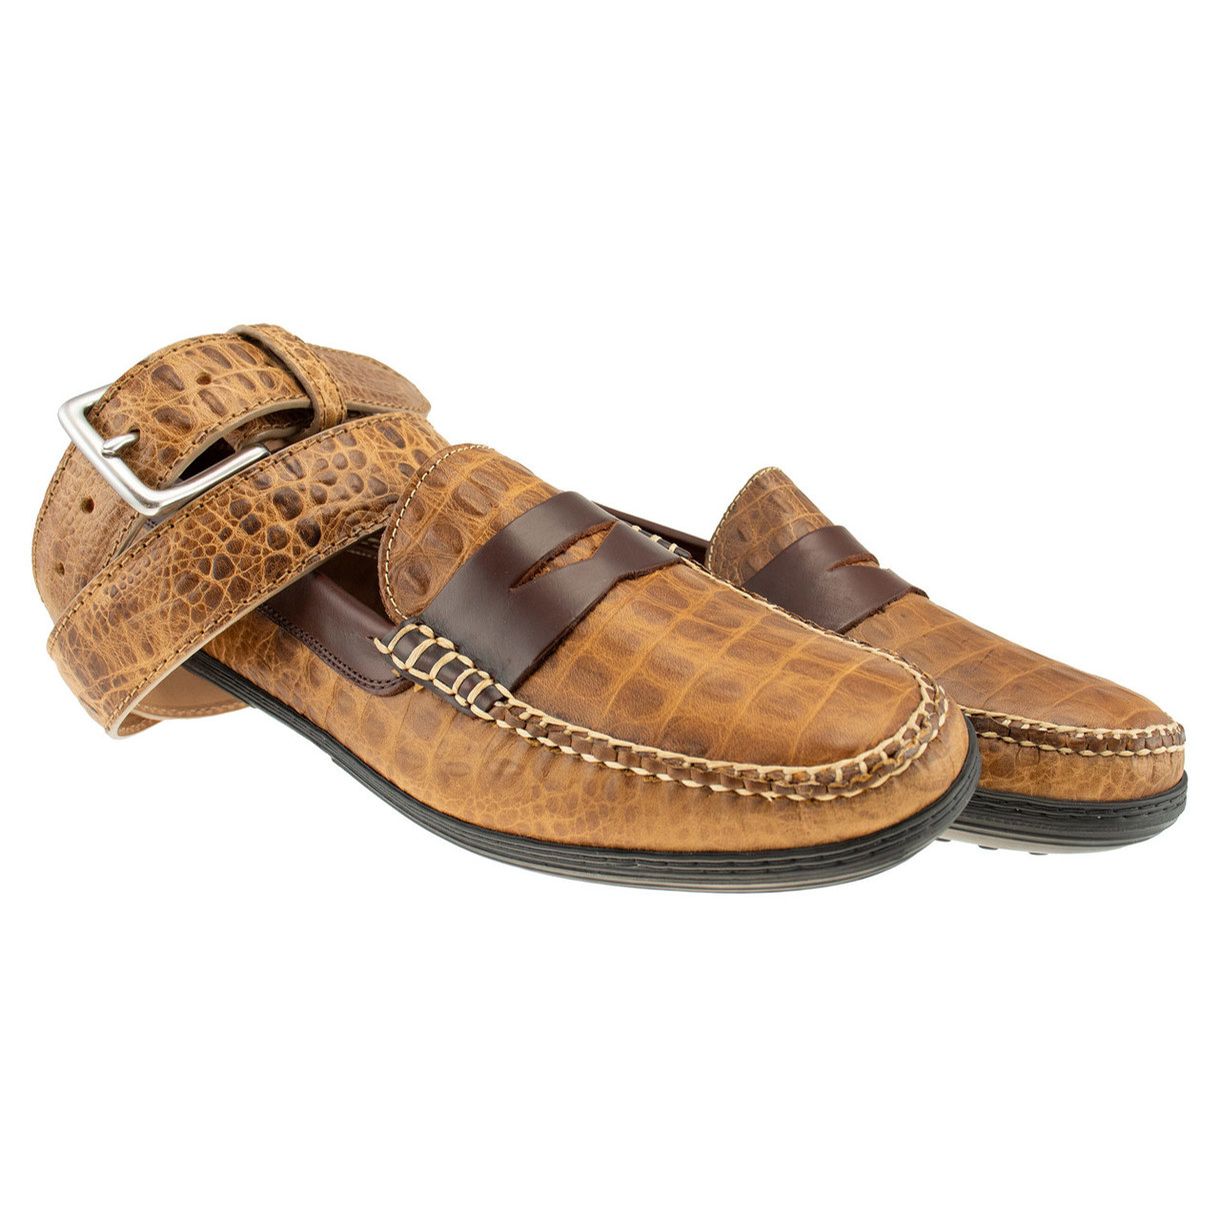 Key West Loafer in Khaki Alligator Grain and Briar Waxy Leather by T.B. Phelps